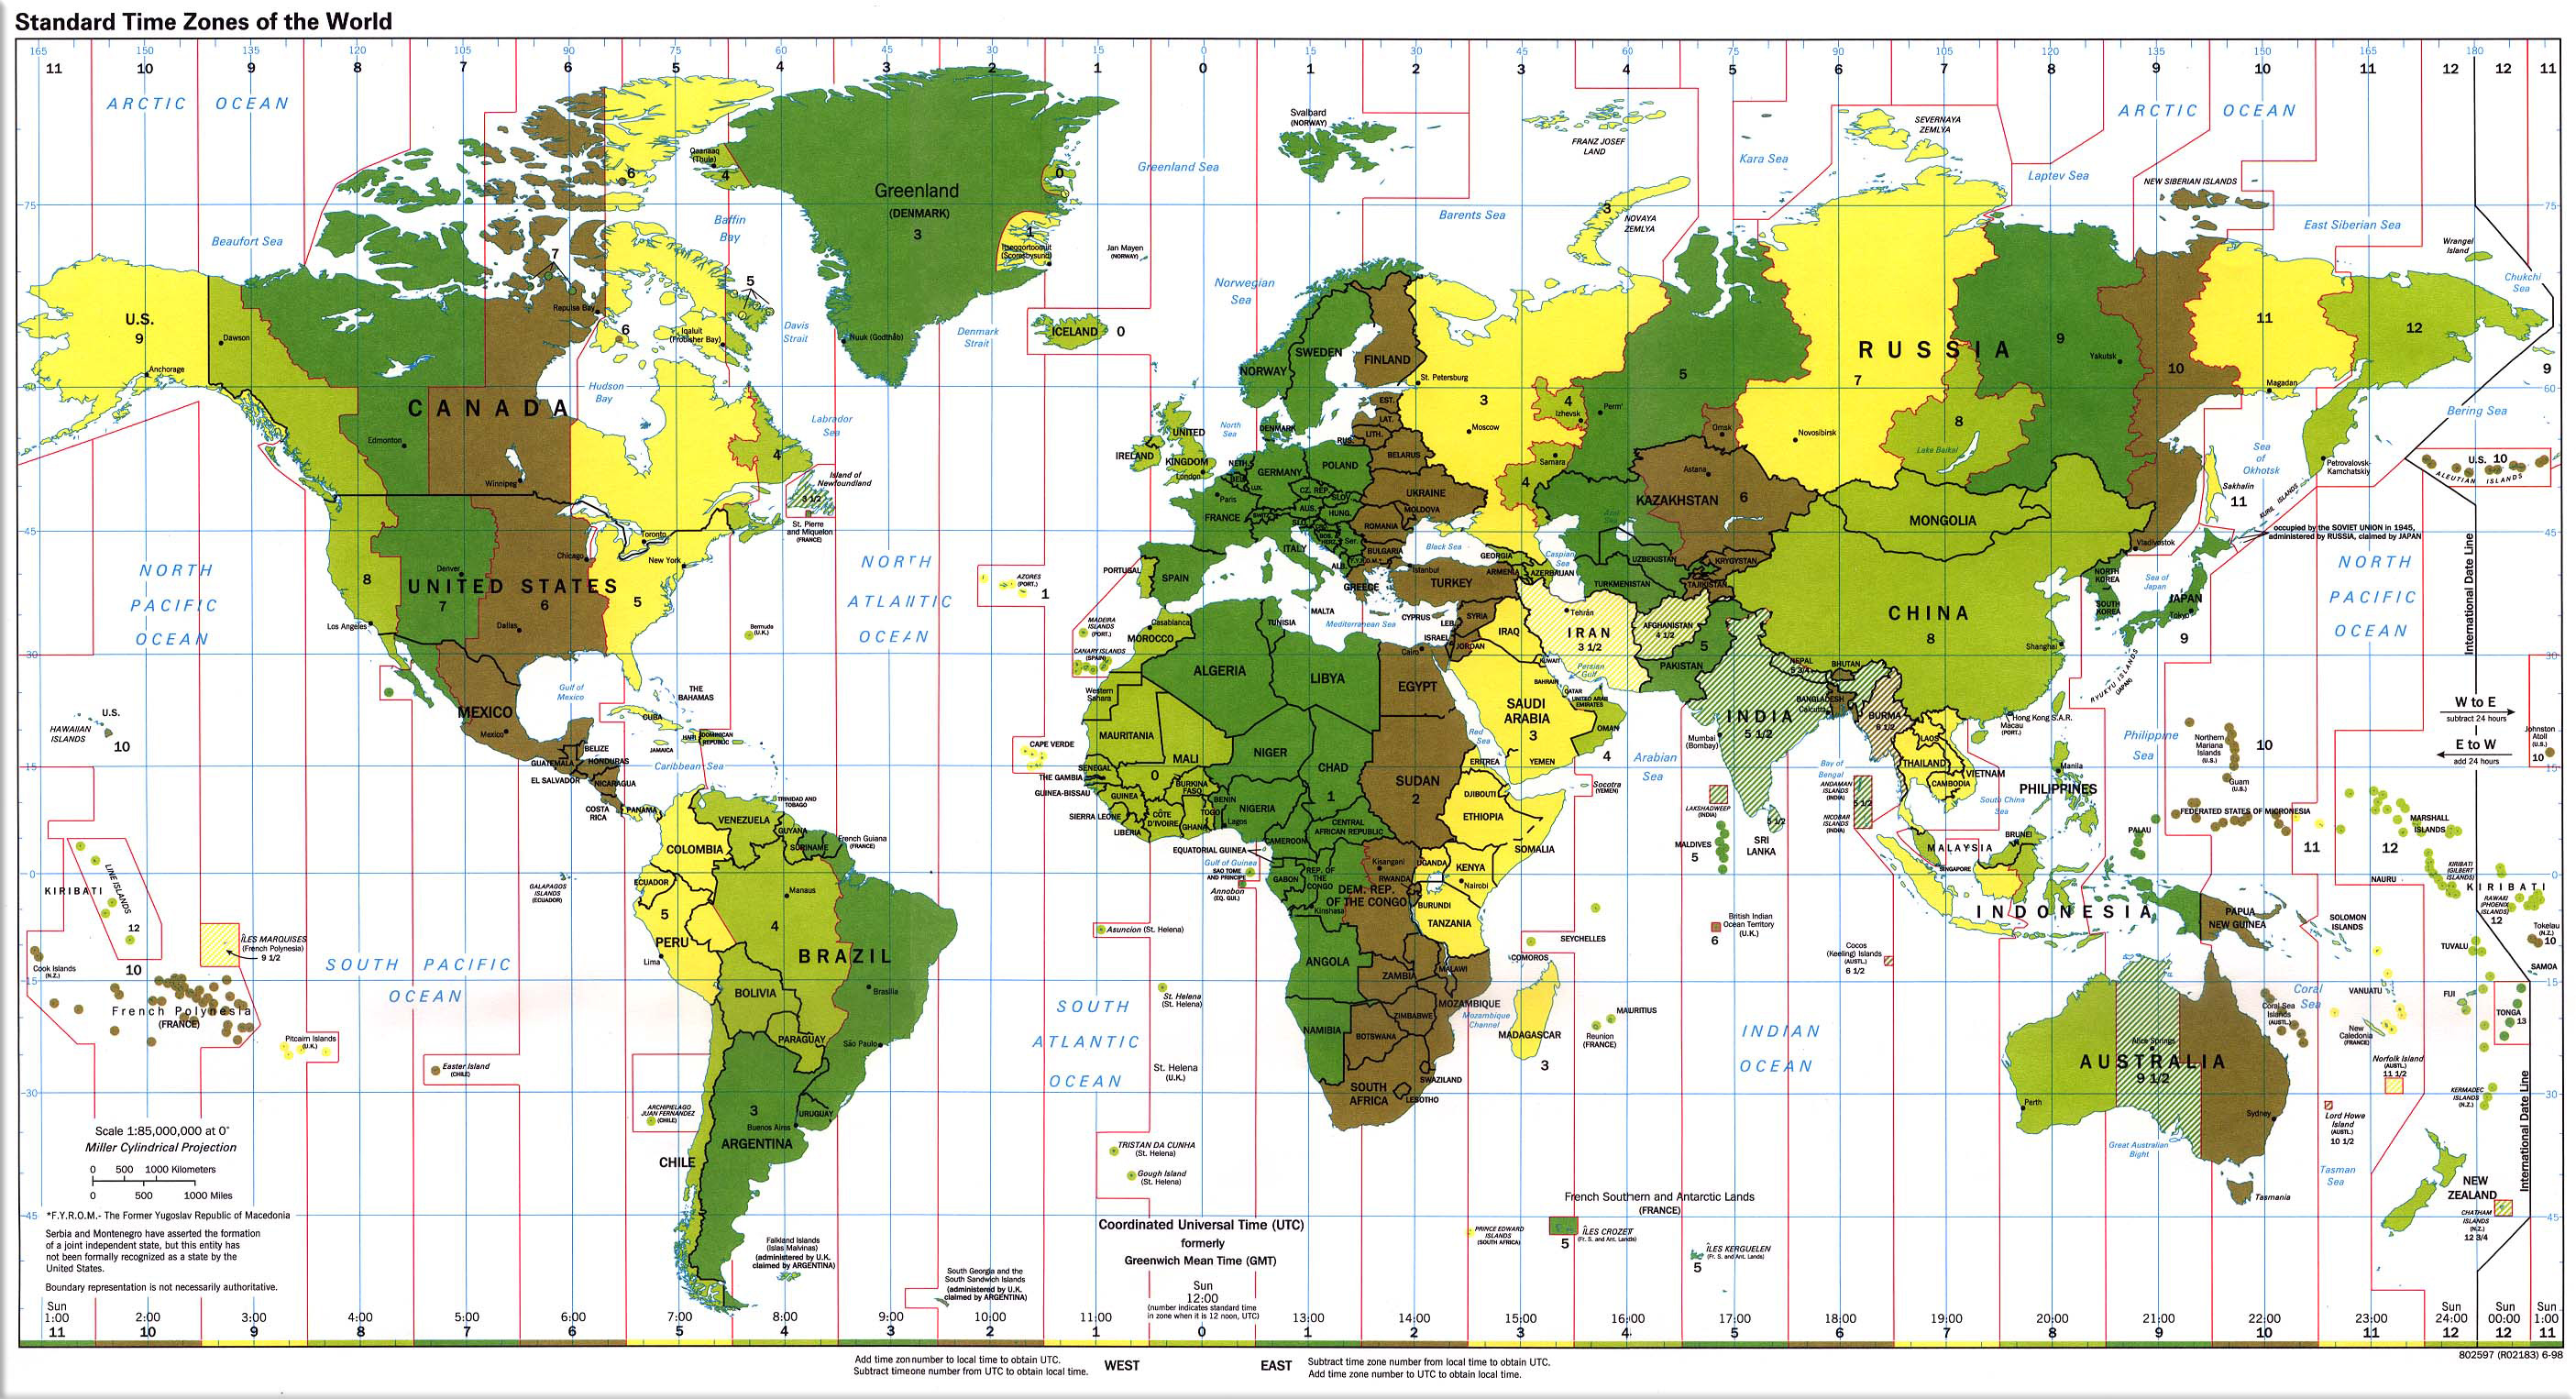 Map of the World Time Zones, credit Mihalko-family